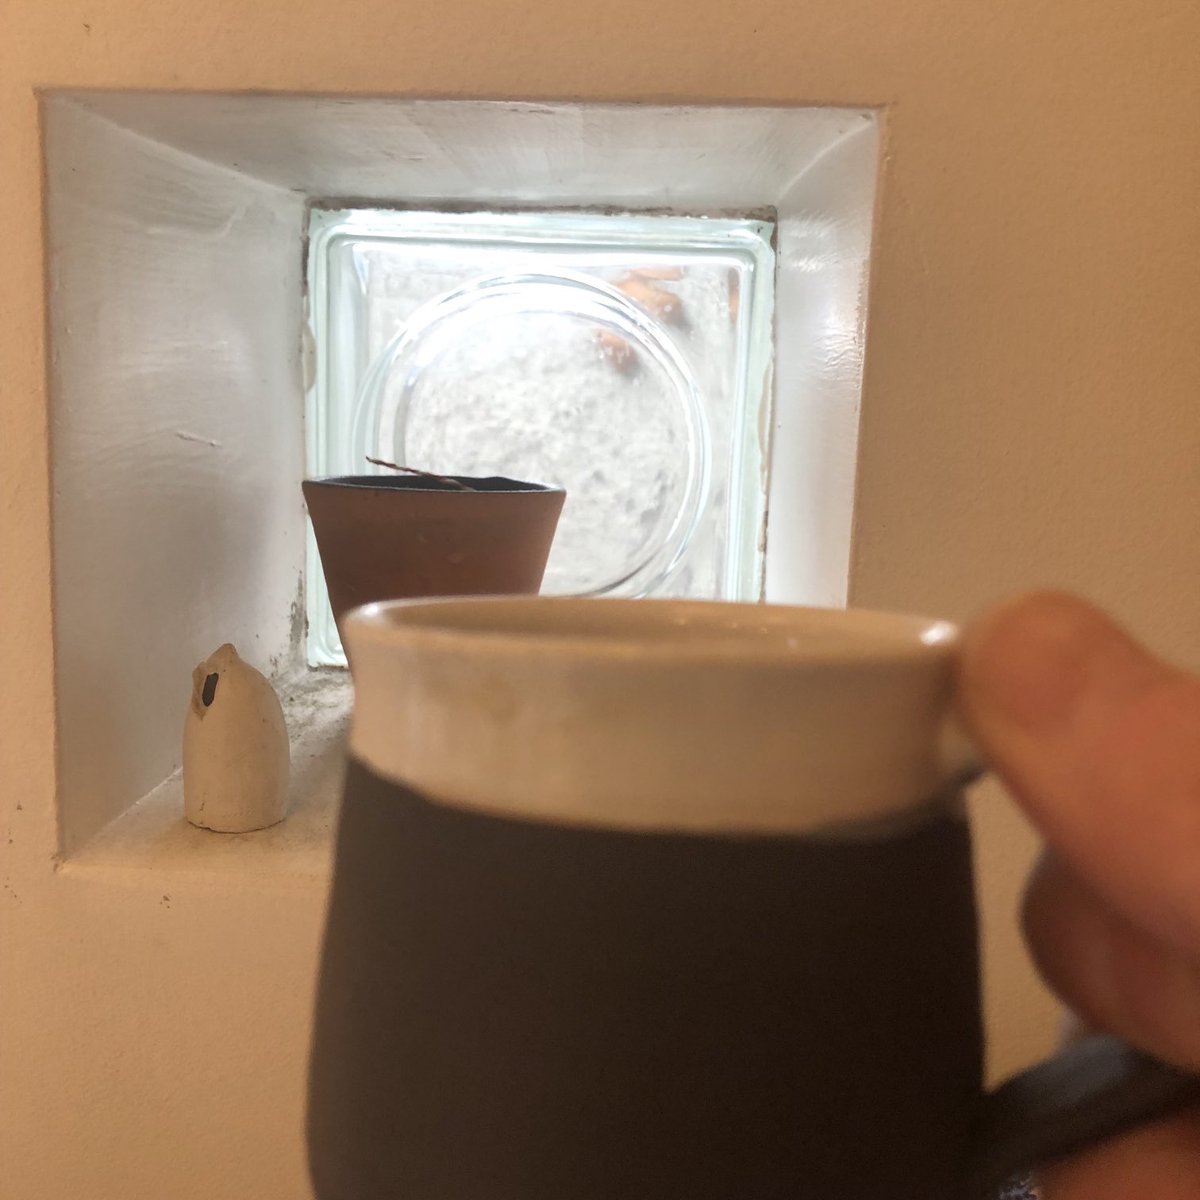 Morning Everyone! Second coffee! Staying in! #becarefuloutthere #coffee #textures #pottery #irishmade #stayingwarm